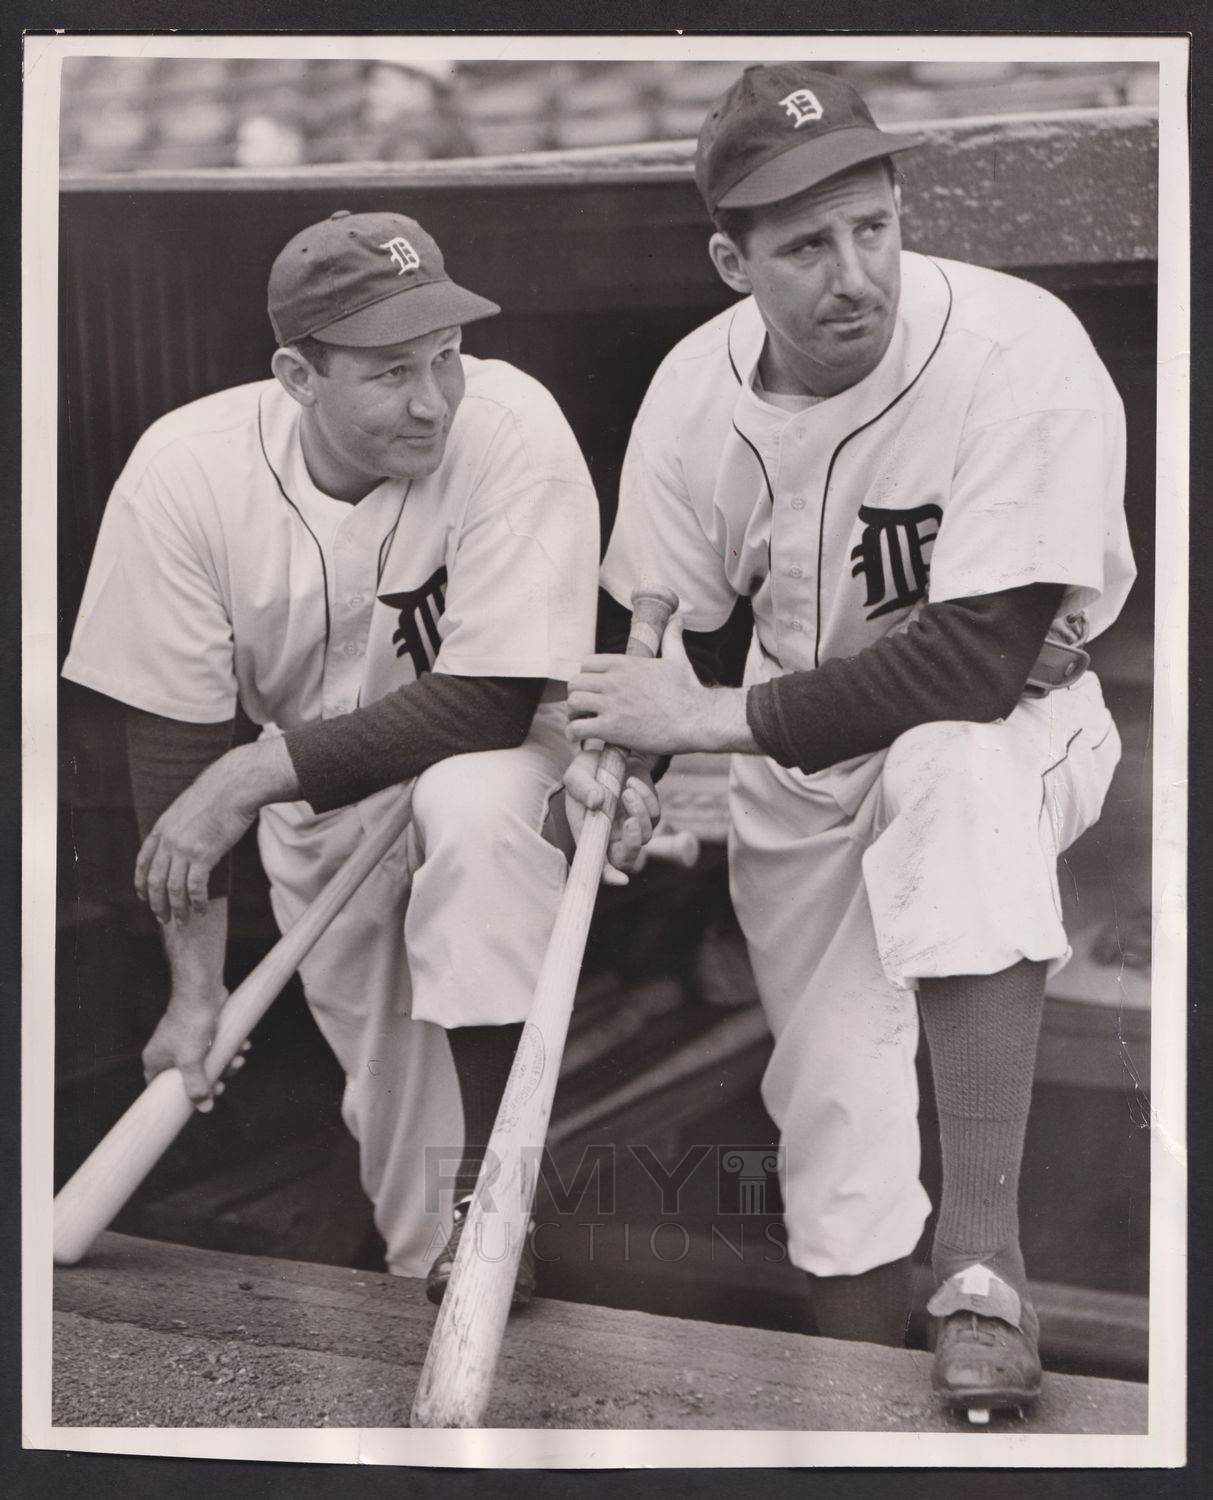 Lot 171 1941 Hank Greenberg Detroit Tigers Star Ready For Military